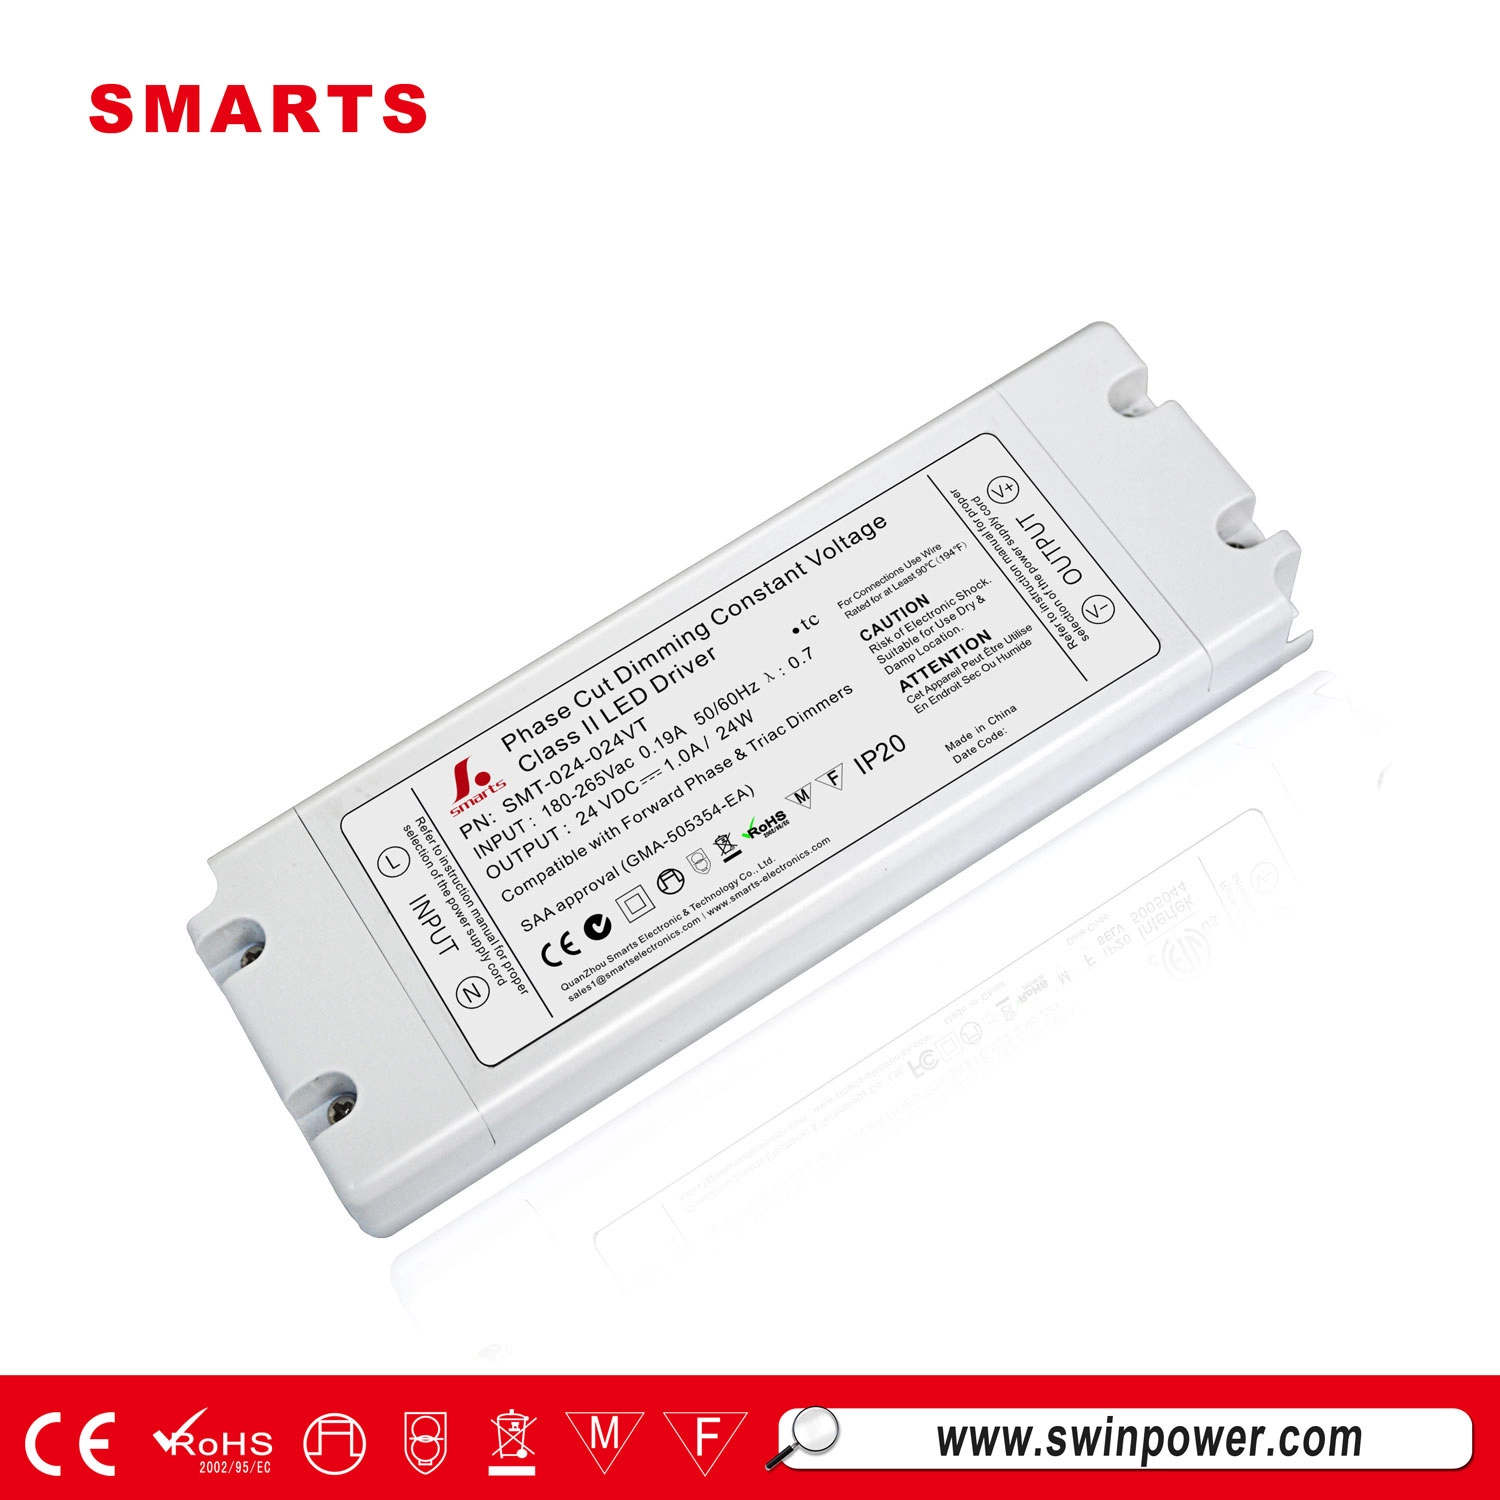 24v 24w Tension Constante Triac Dimmable Alimentation Led